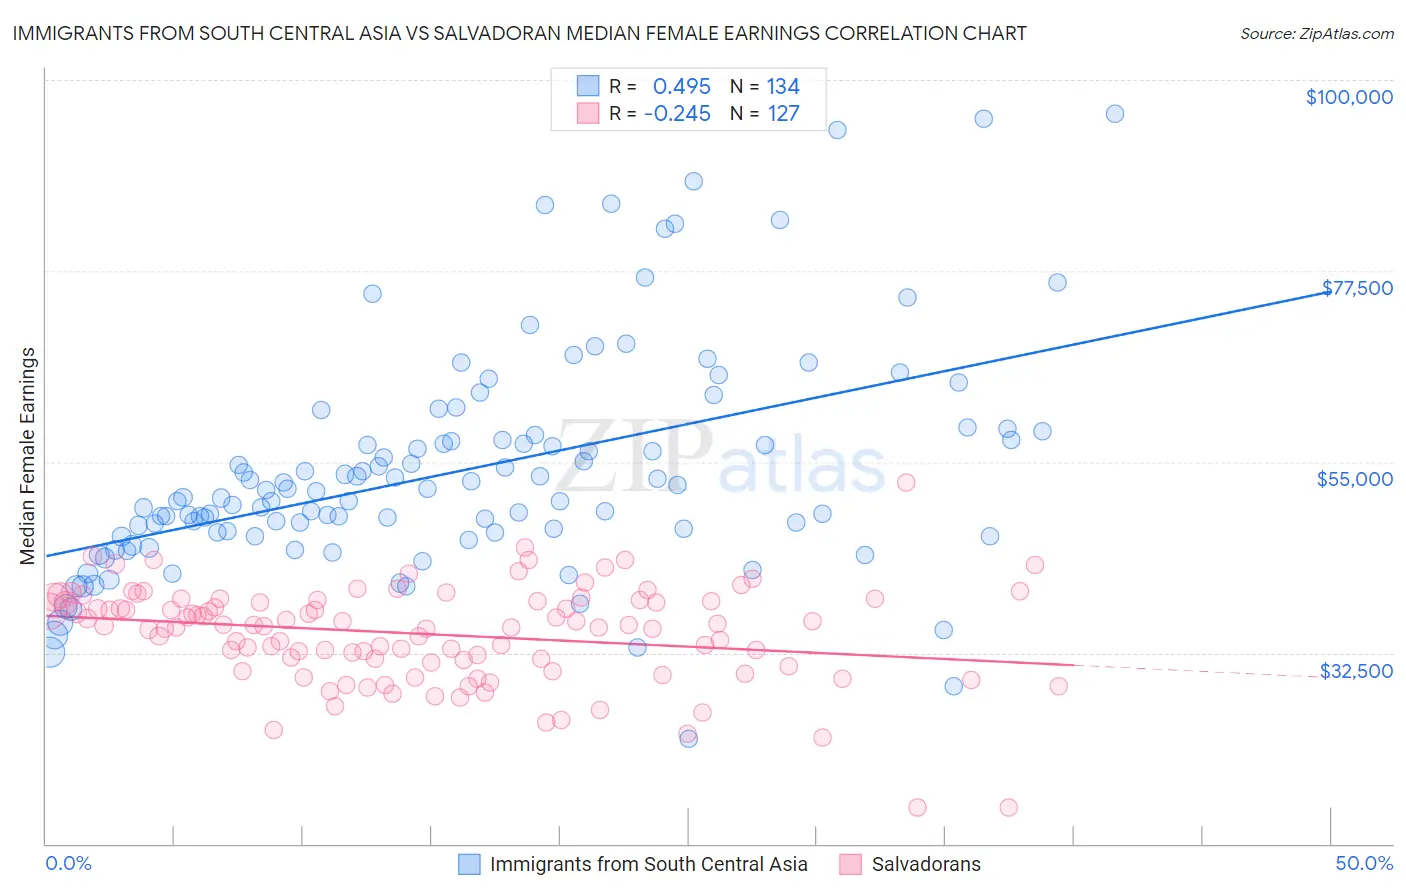 Immigrants from South Central Asia vs Salvadoran Median Female Earnings